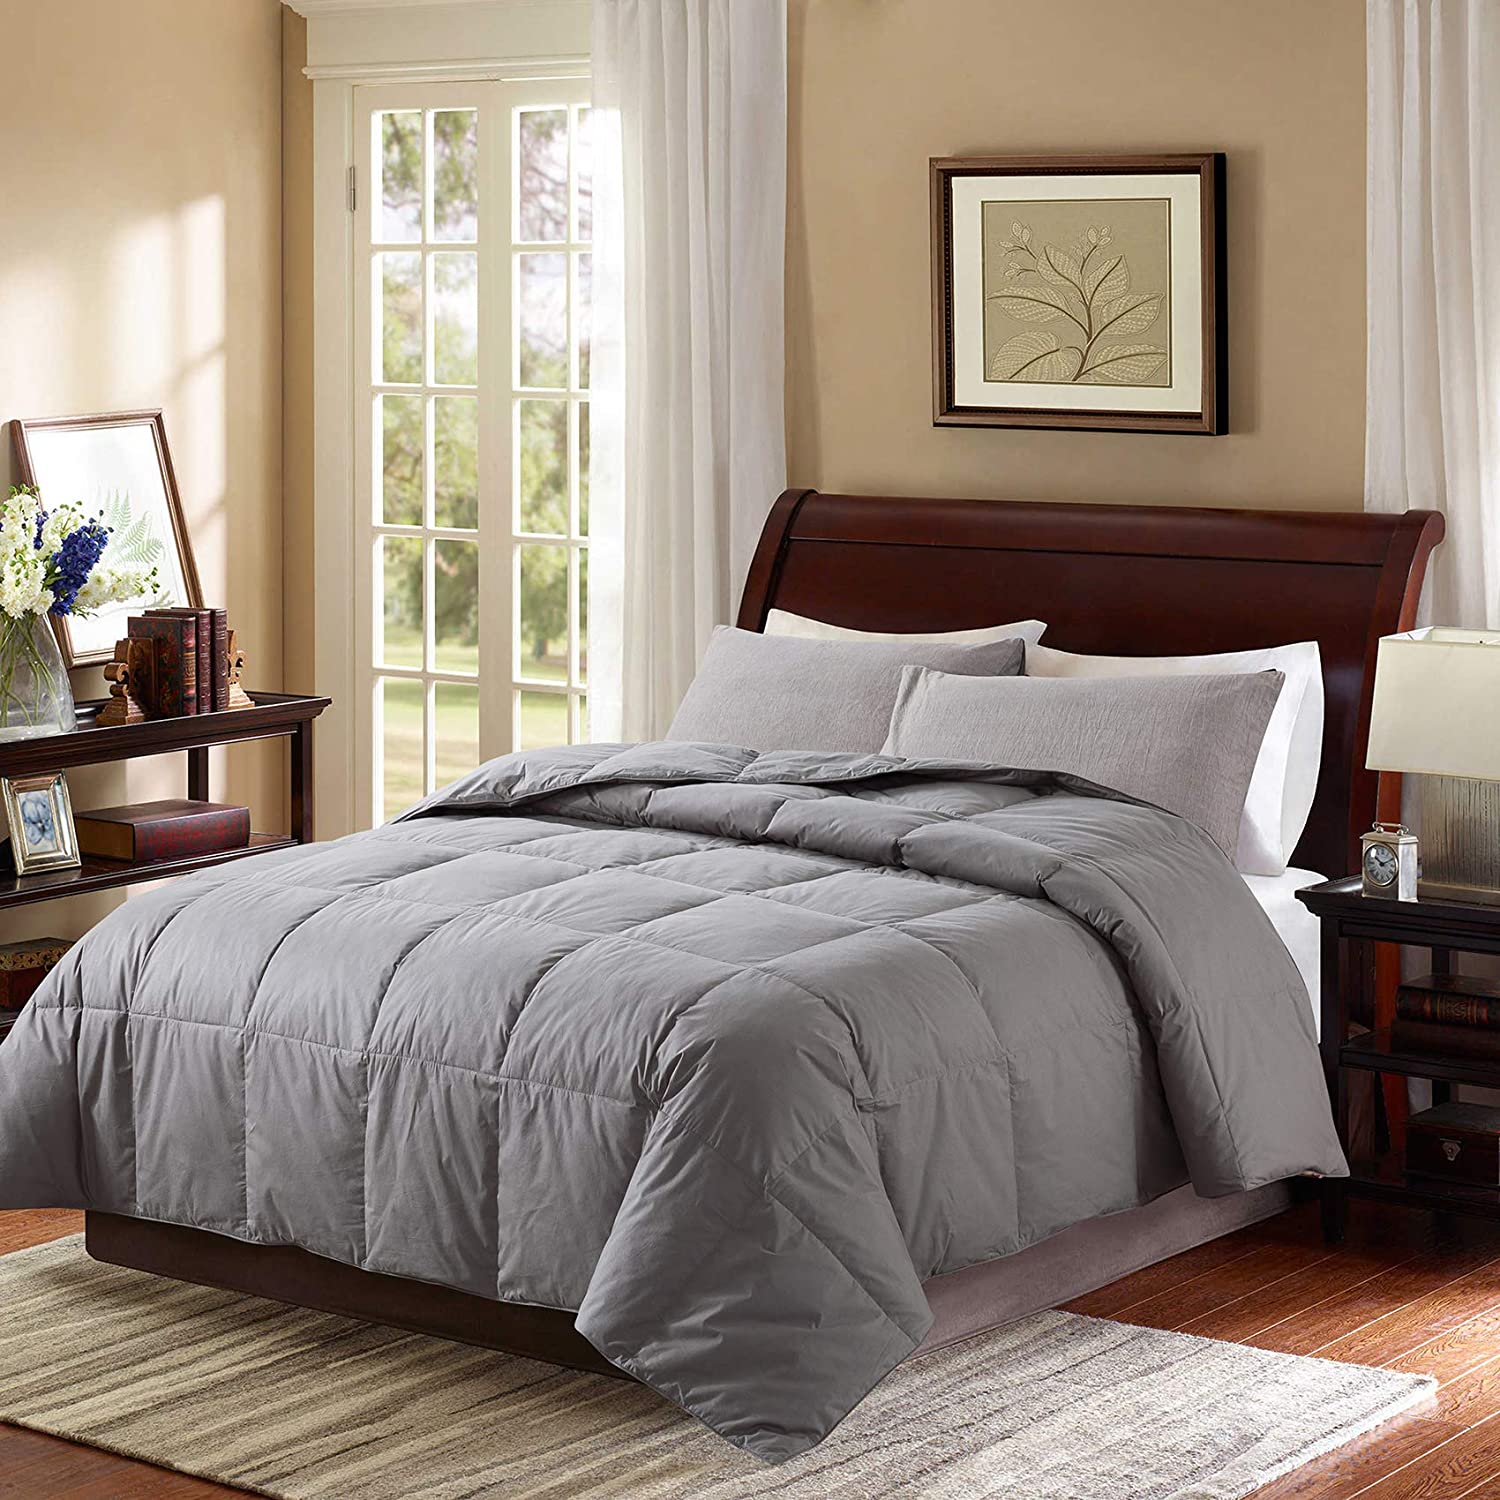 Details about   Ubauba All-Season Down Comforter 100% Cotton Hypoallergenic Quilted Feather Comf 